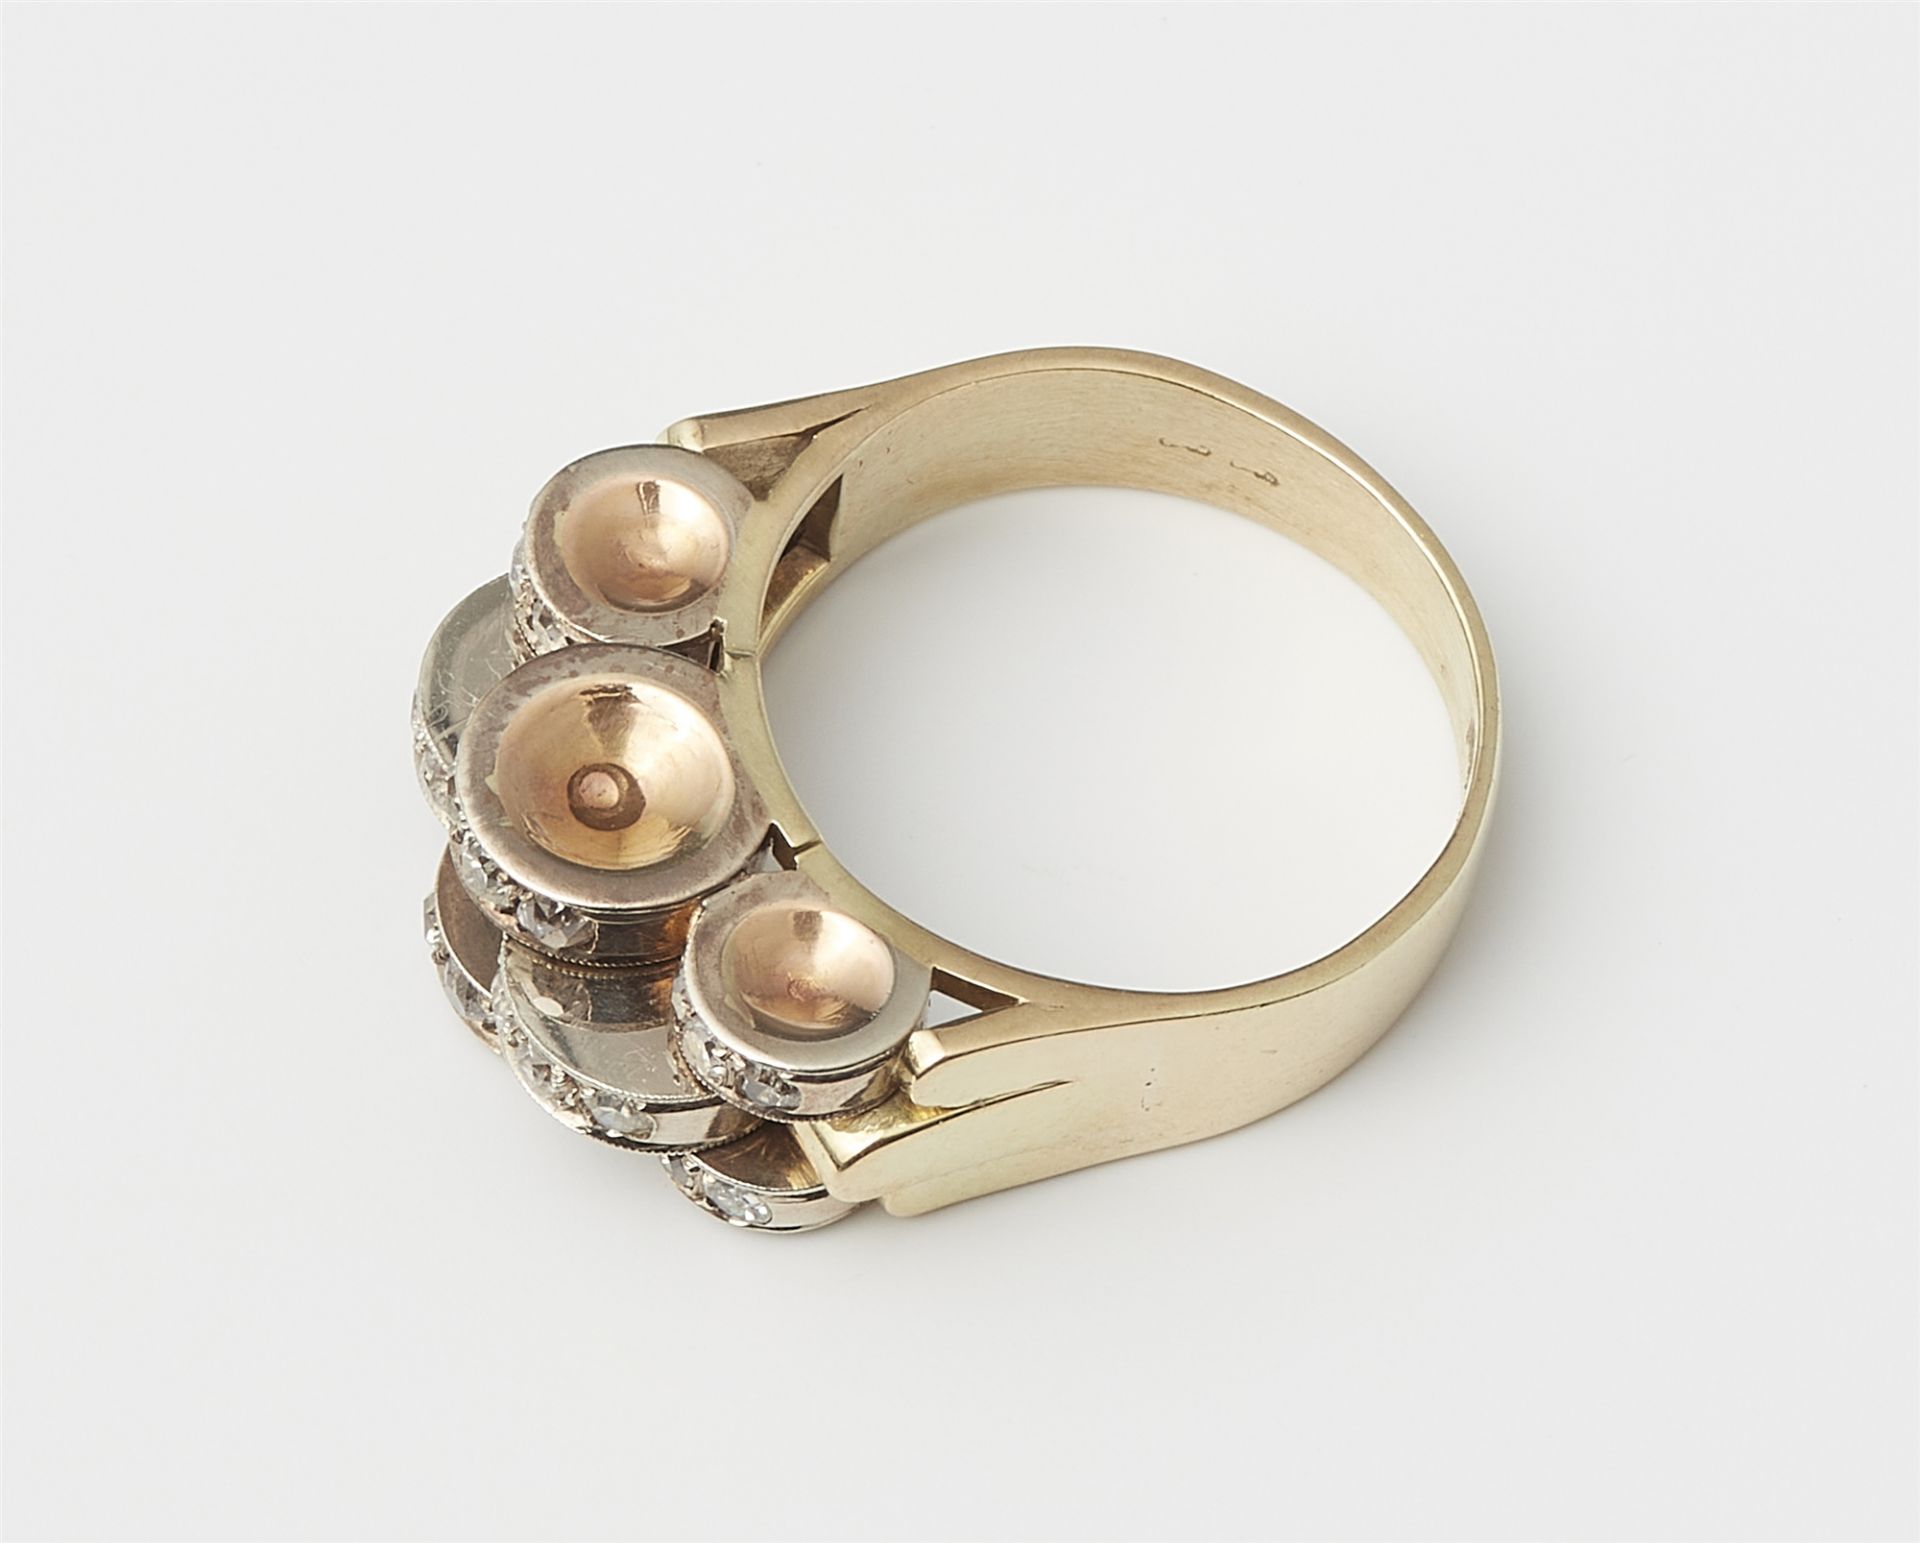 An Austrian Retro Style 14k gold and diamond ring. - Image 2 of 2